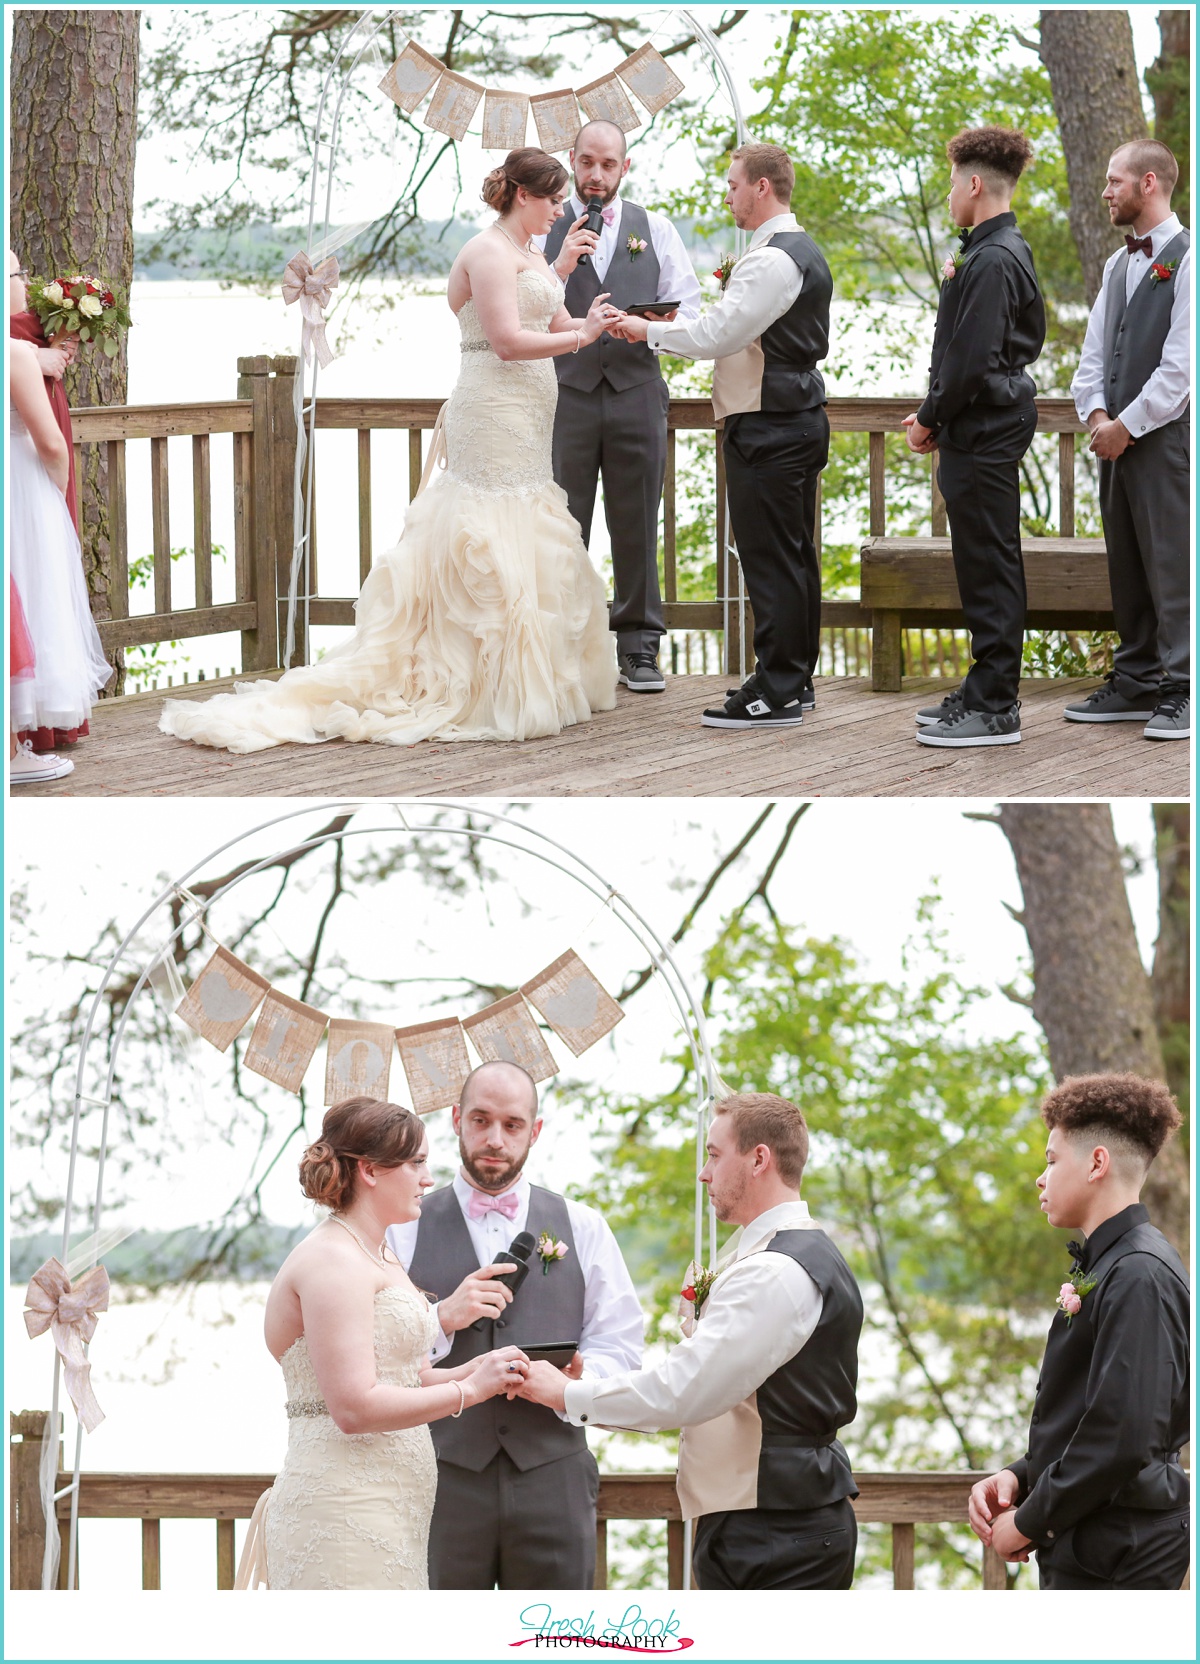 exchanging rings at wedding ceremony